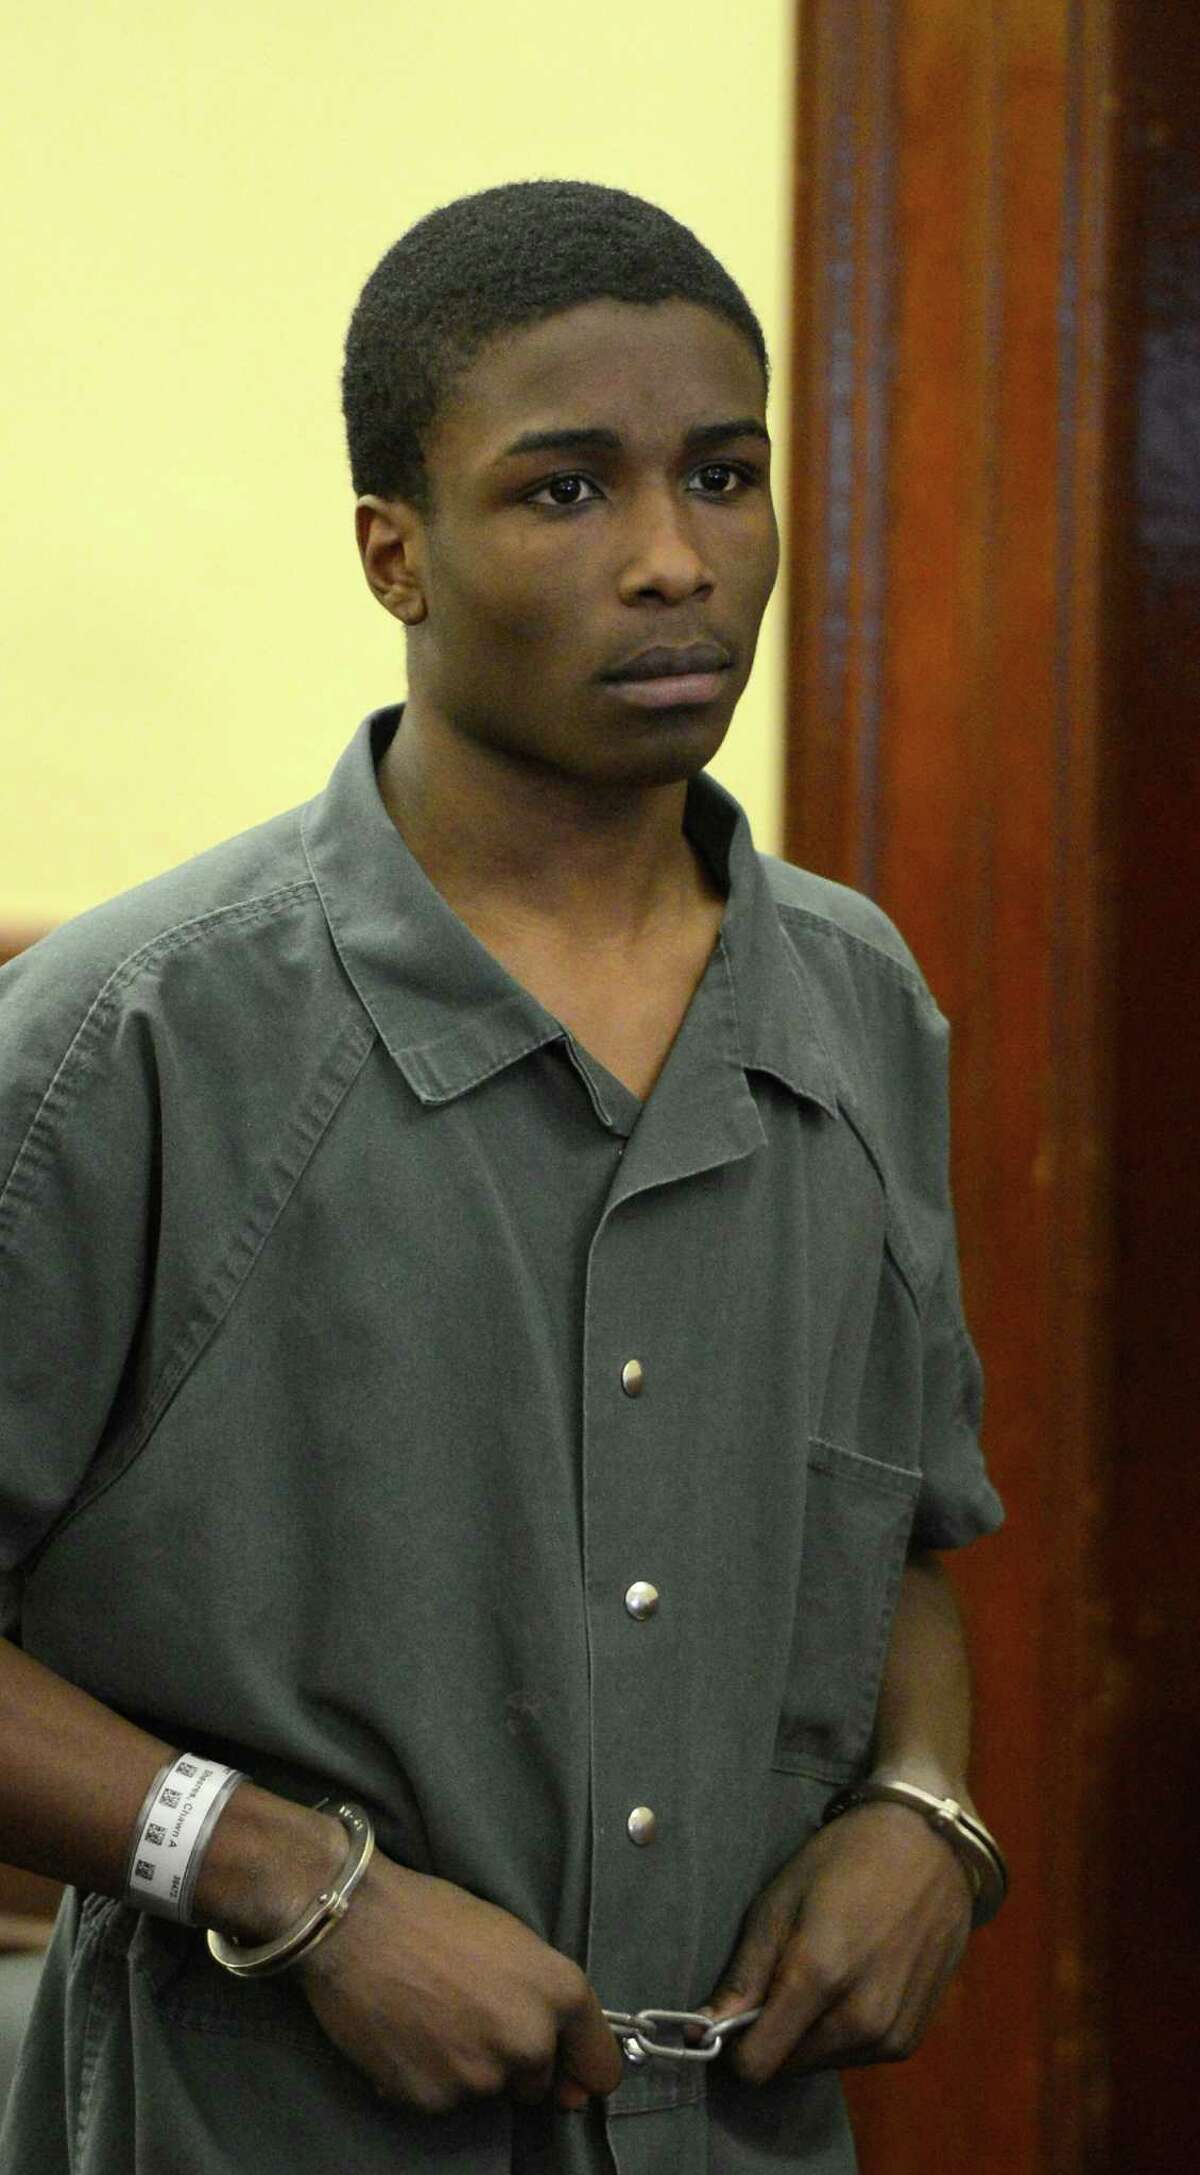 Chawn A. Sheares, 16, appears for his arraignment on murder and robbery charges in Rensselaer County Court March 18, 2013 in Troy, N.Y. (Skip Dickstein/Times Union)